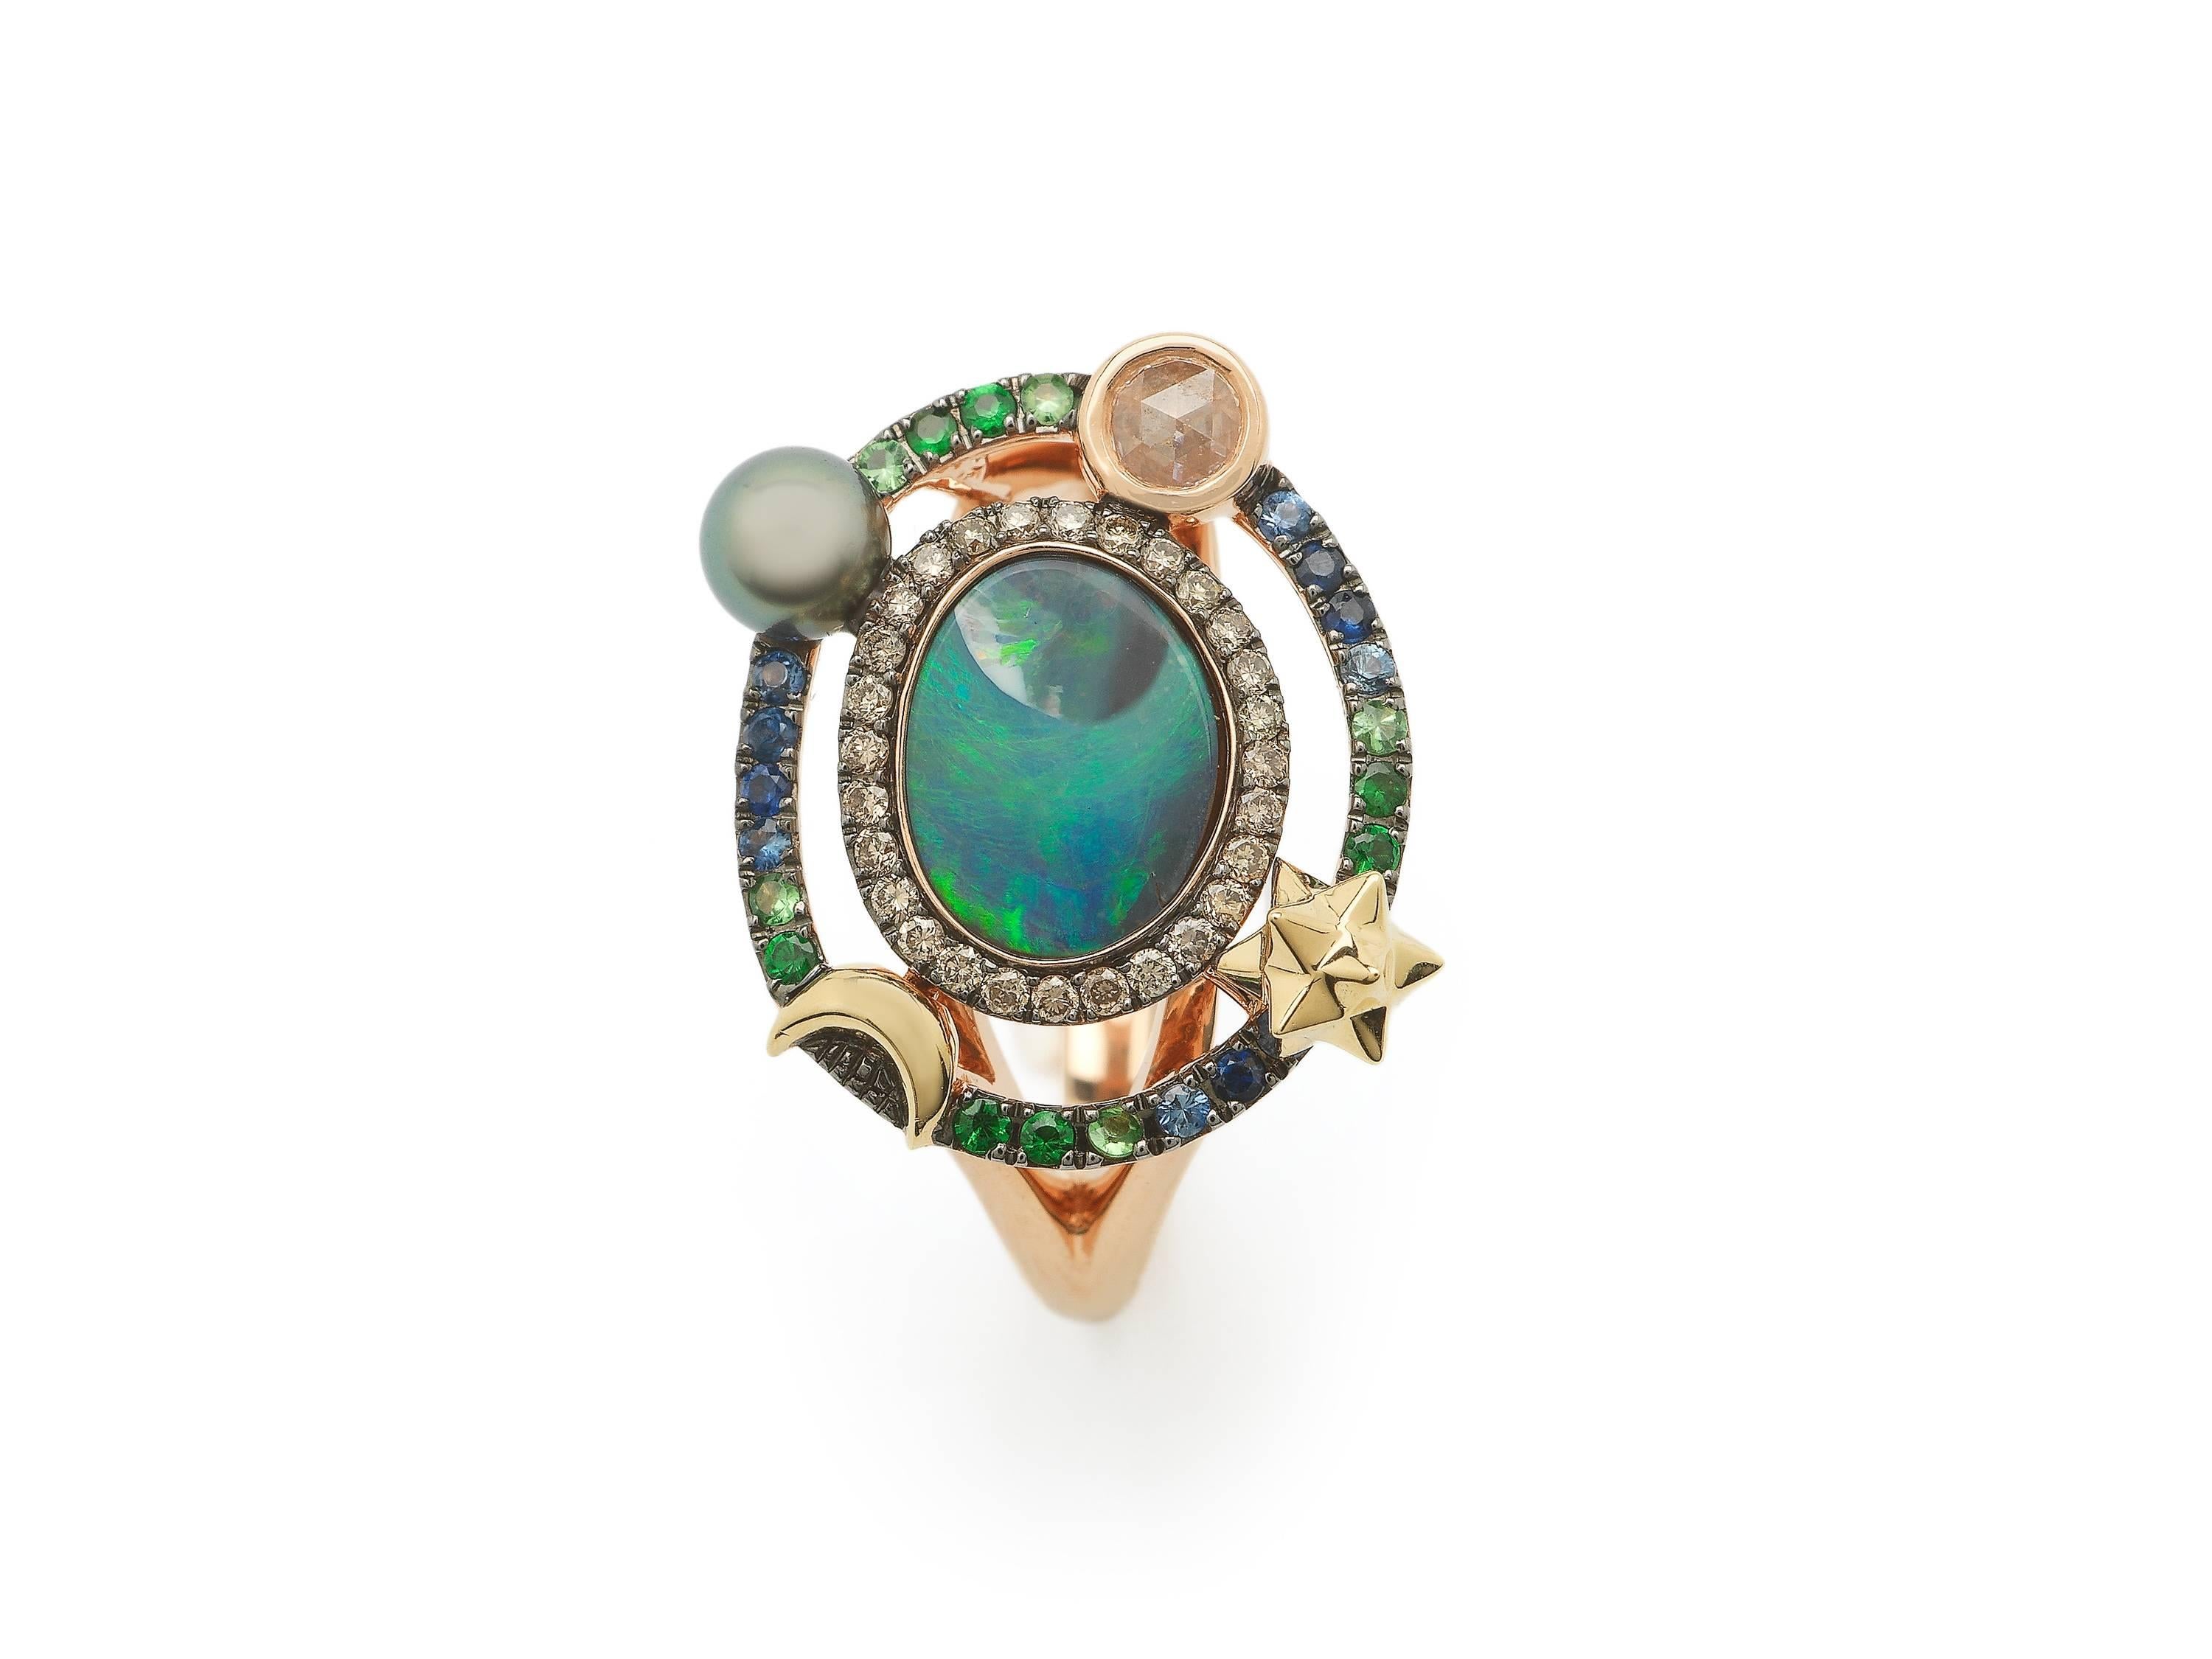 The daintier, but no less striking sibling to the Galaxy Cocktail Ring, this ring is designed in 18k rose and yellow gold, with beautiful opal at its centre. With depths that evoke the expanse of the universe, each opal is unique. The stone is